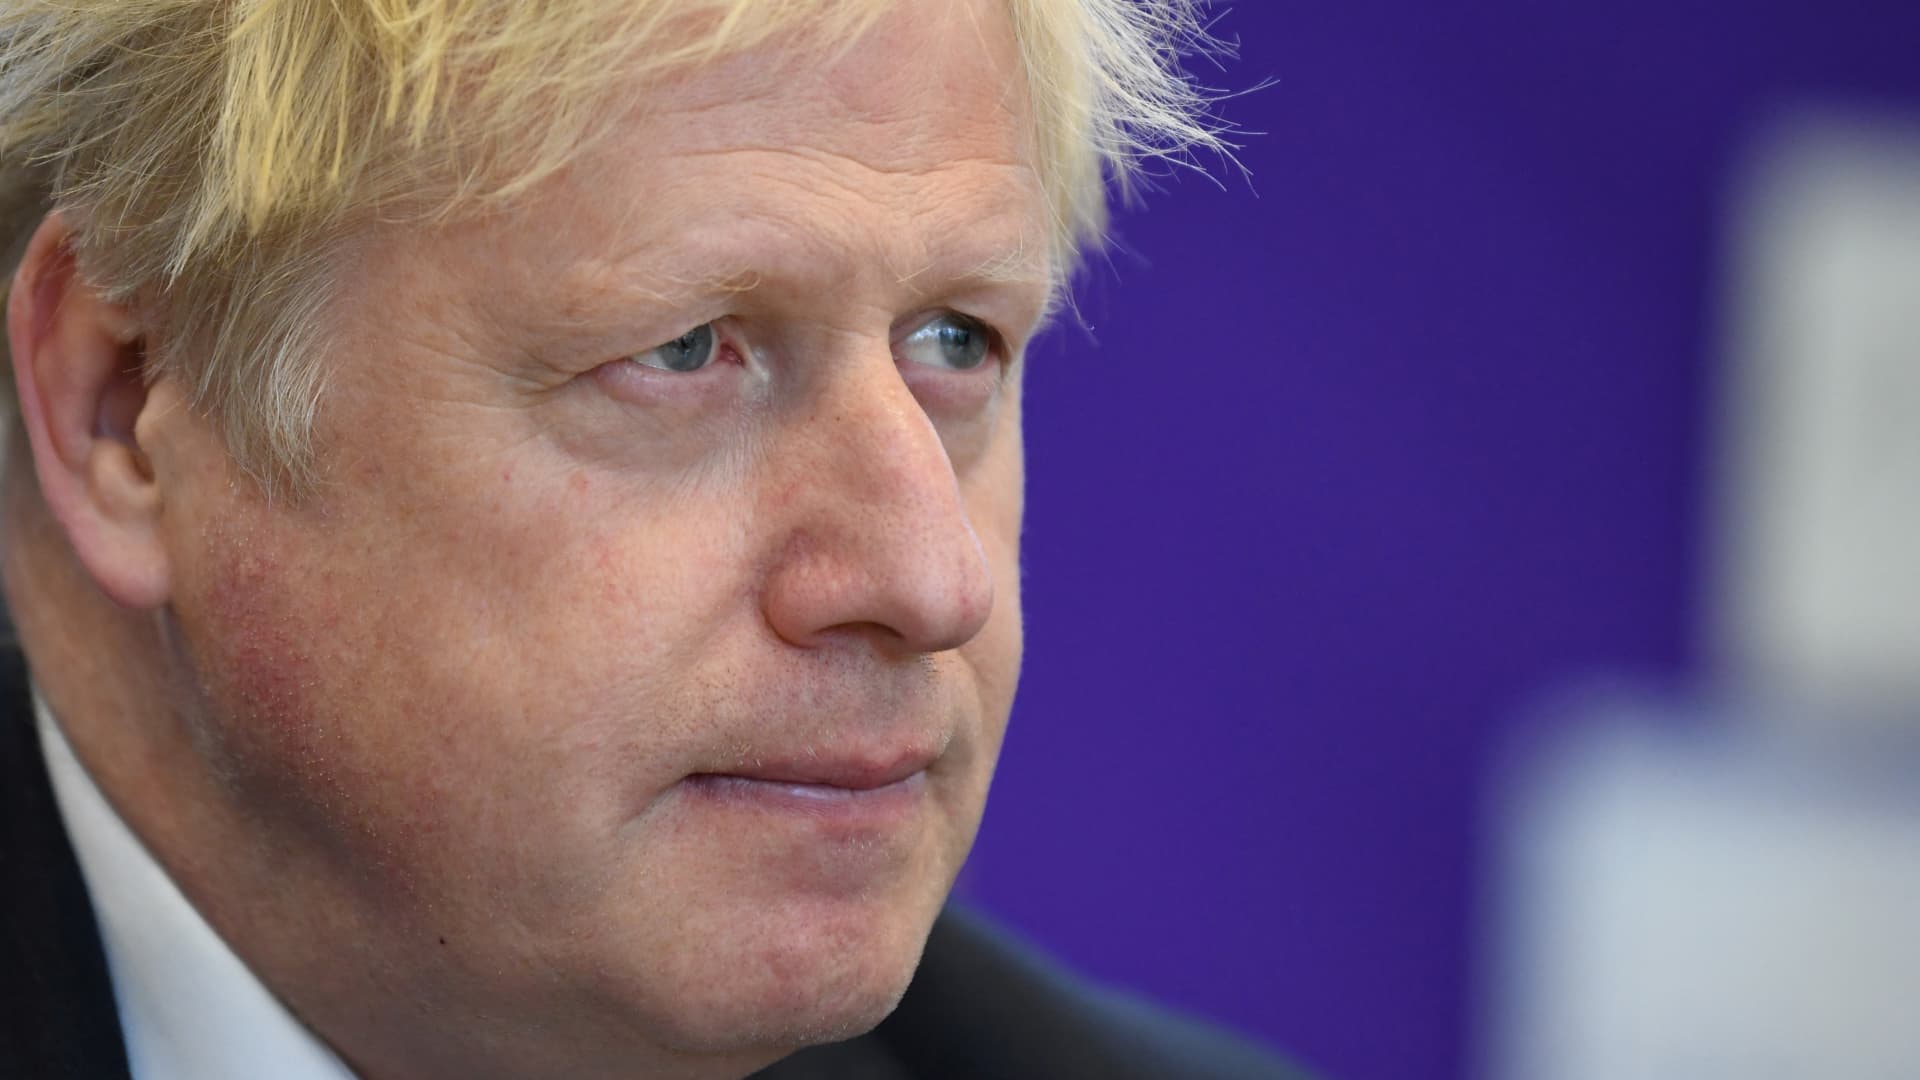 The UK’s Boris Johnson has stepped down. Here’s what happens next — and who could replace him